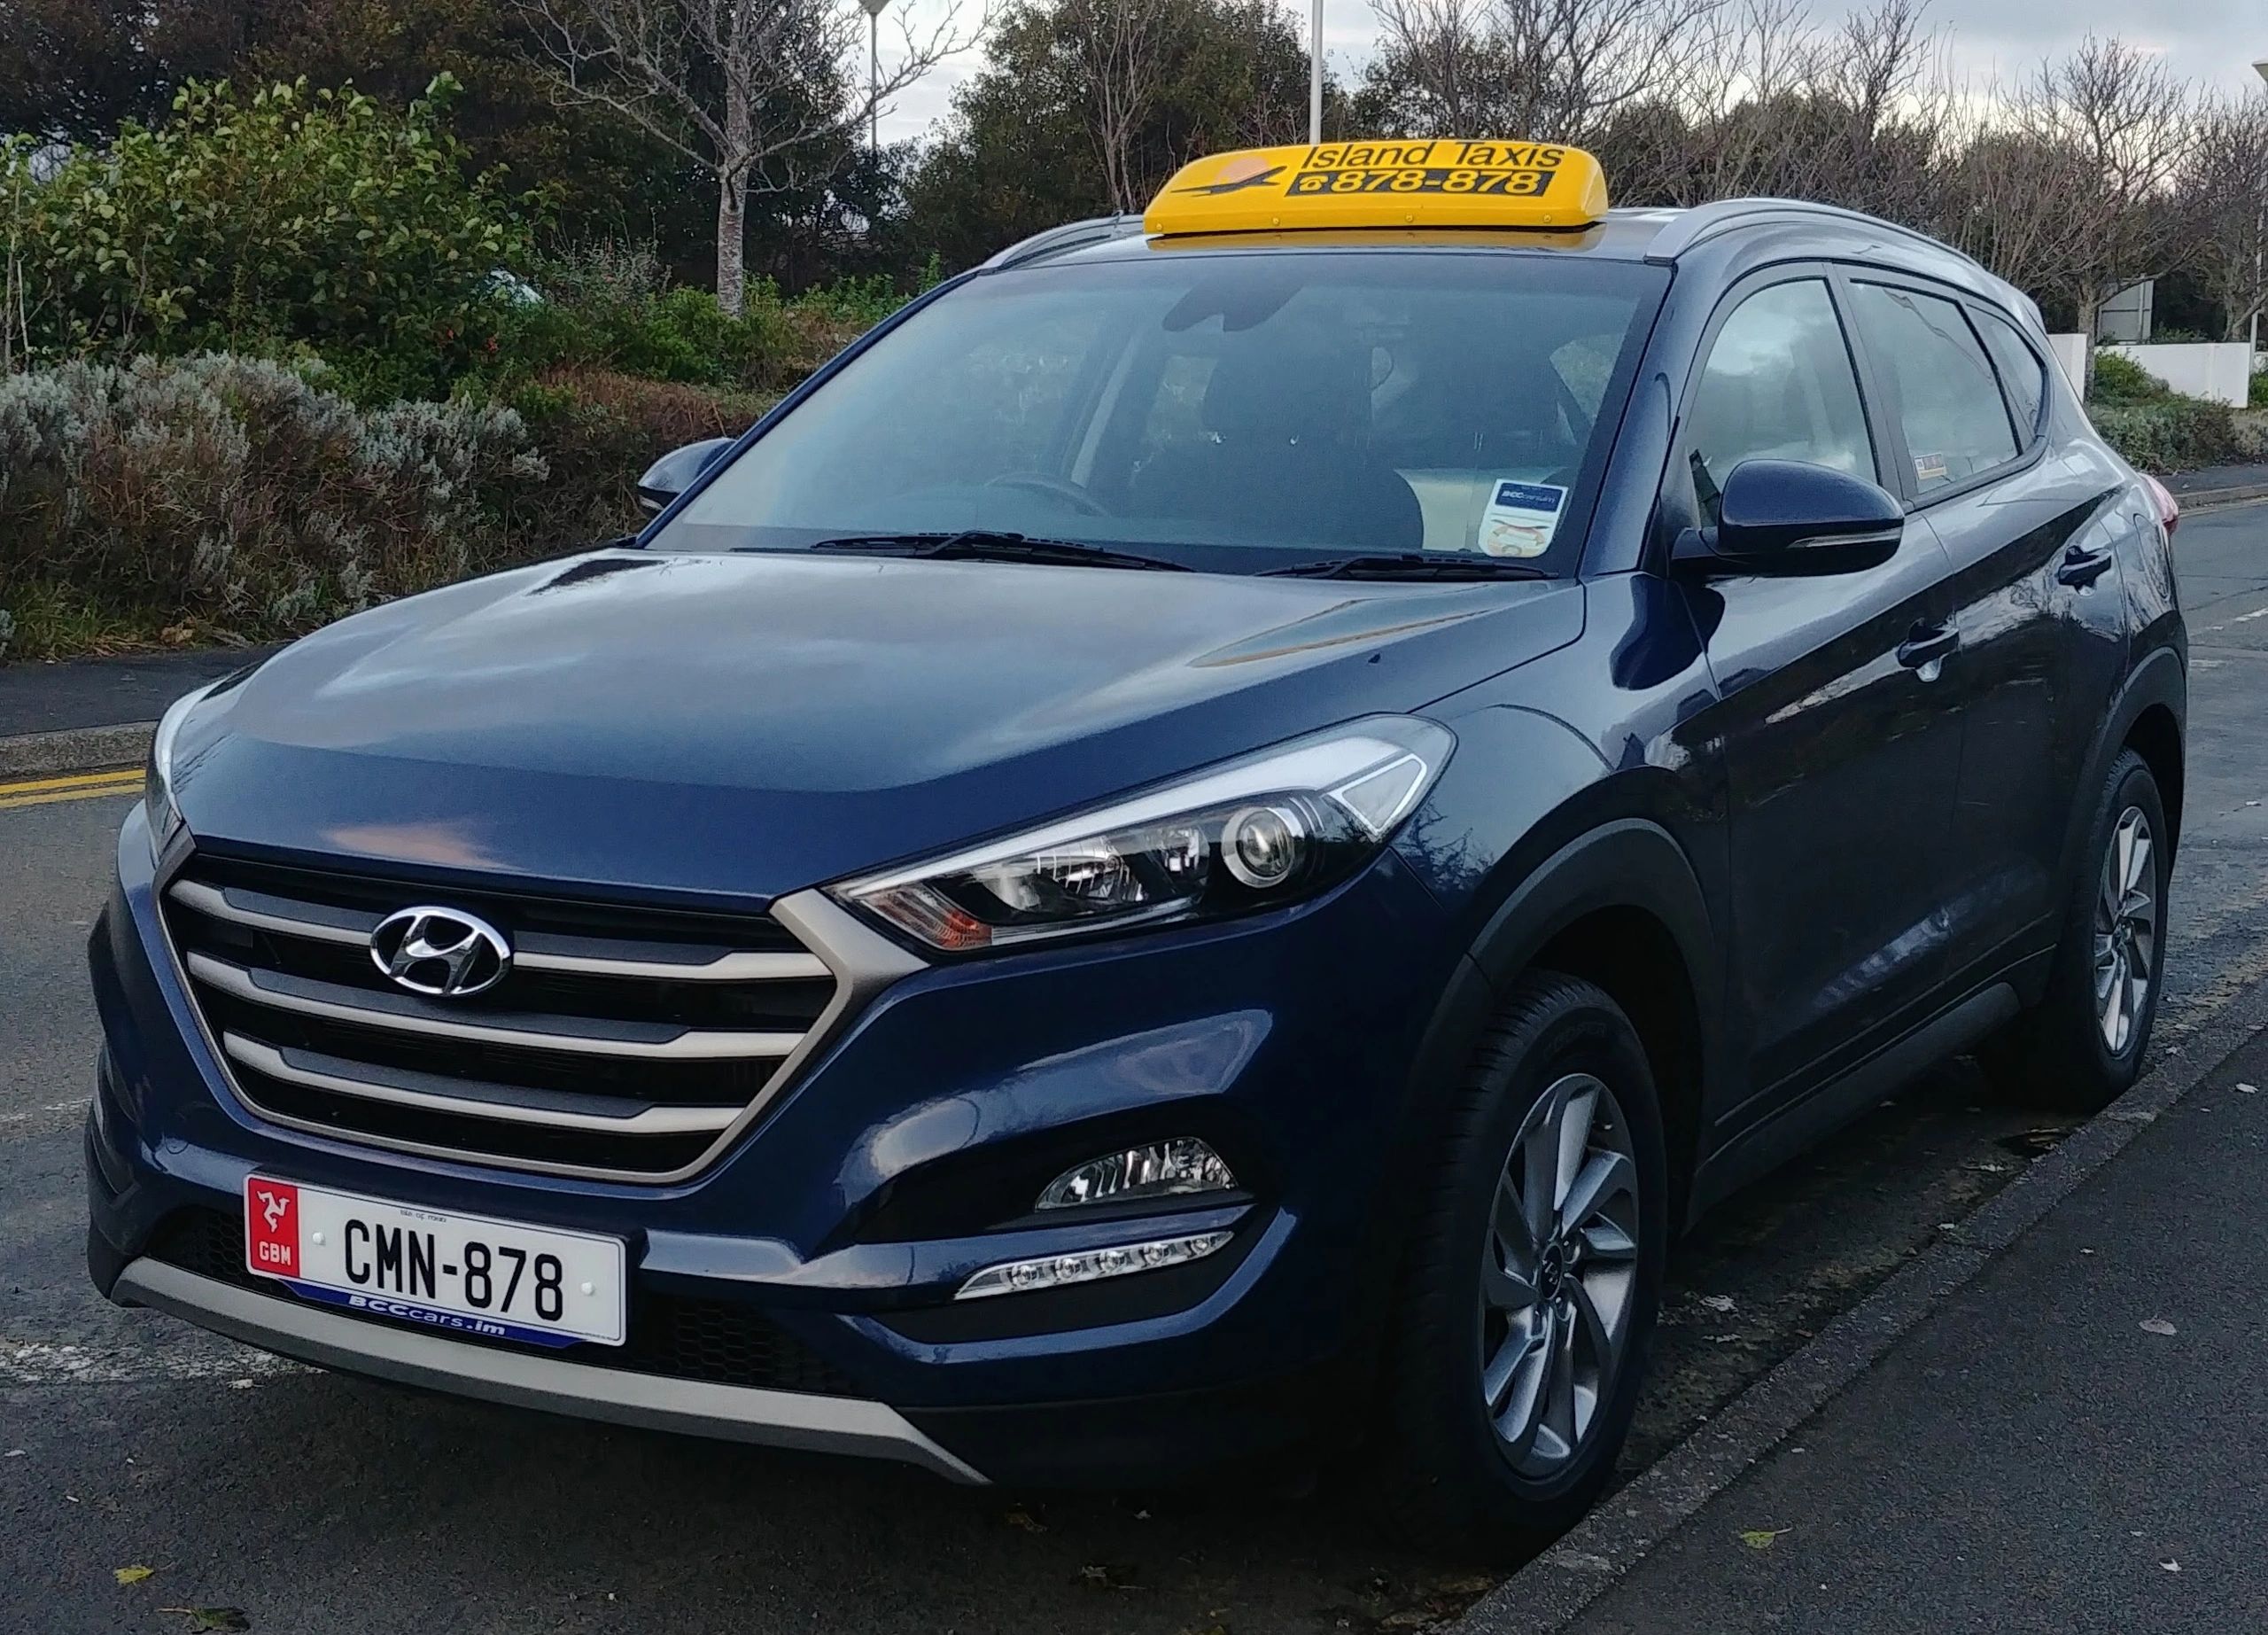 Island Taxis Limited blue Hyundai Tucson Taxi pictured on the pre-booked rank at Isle of man airport